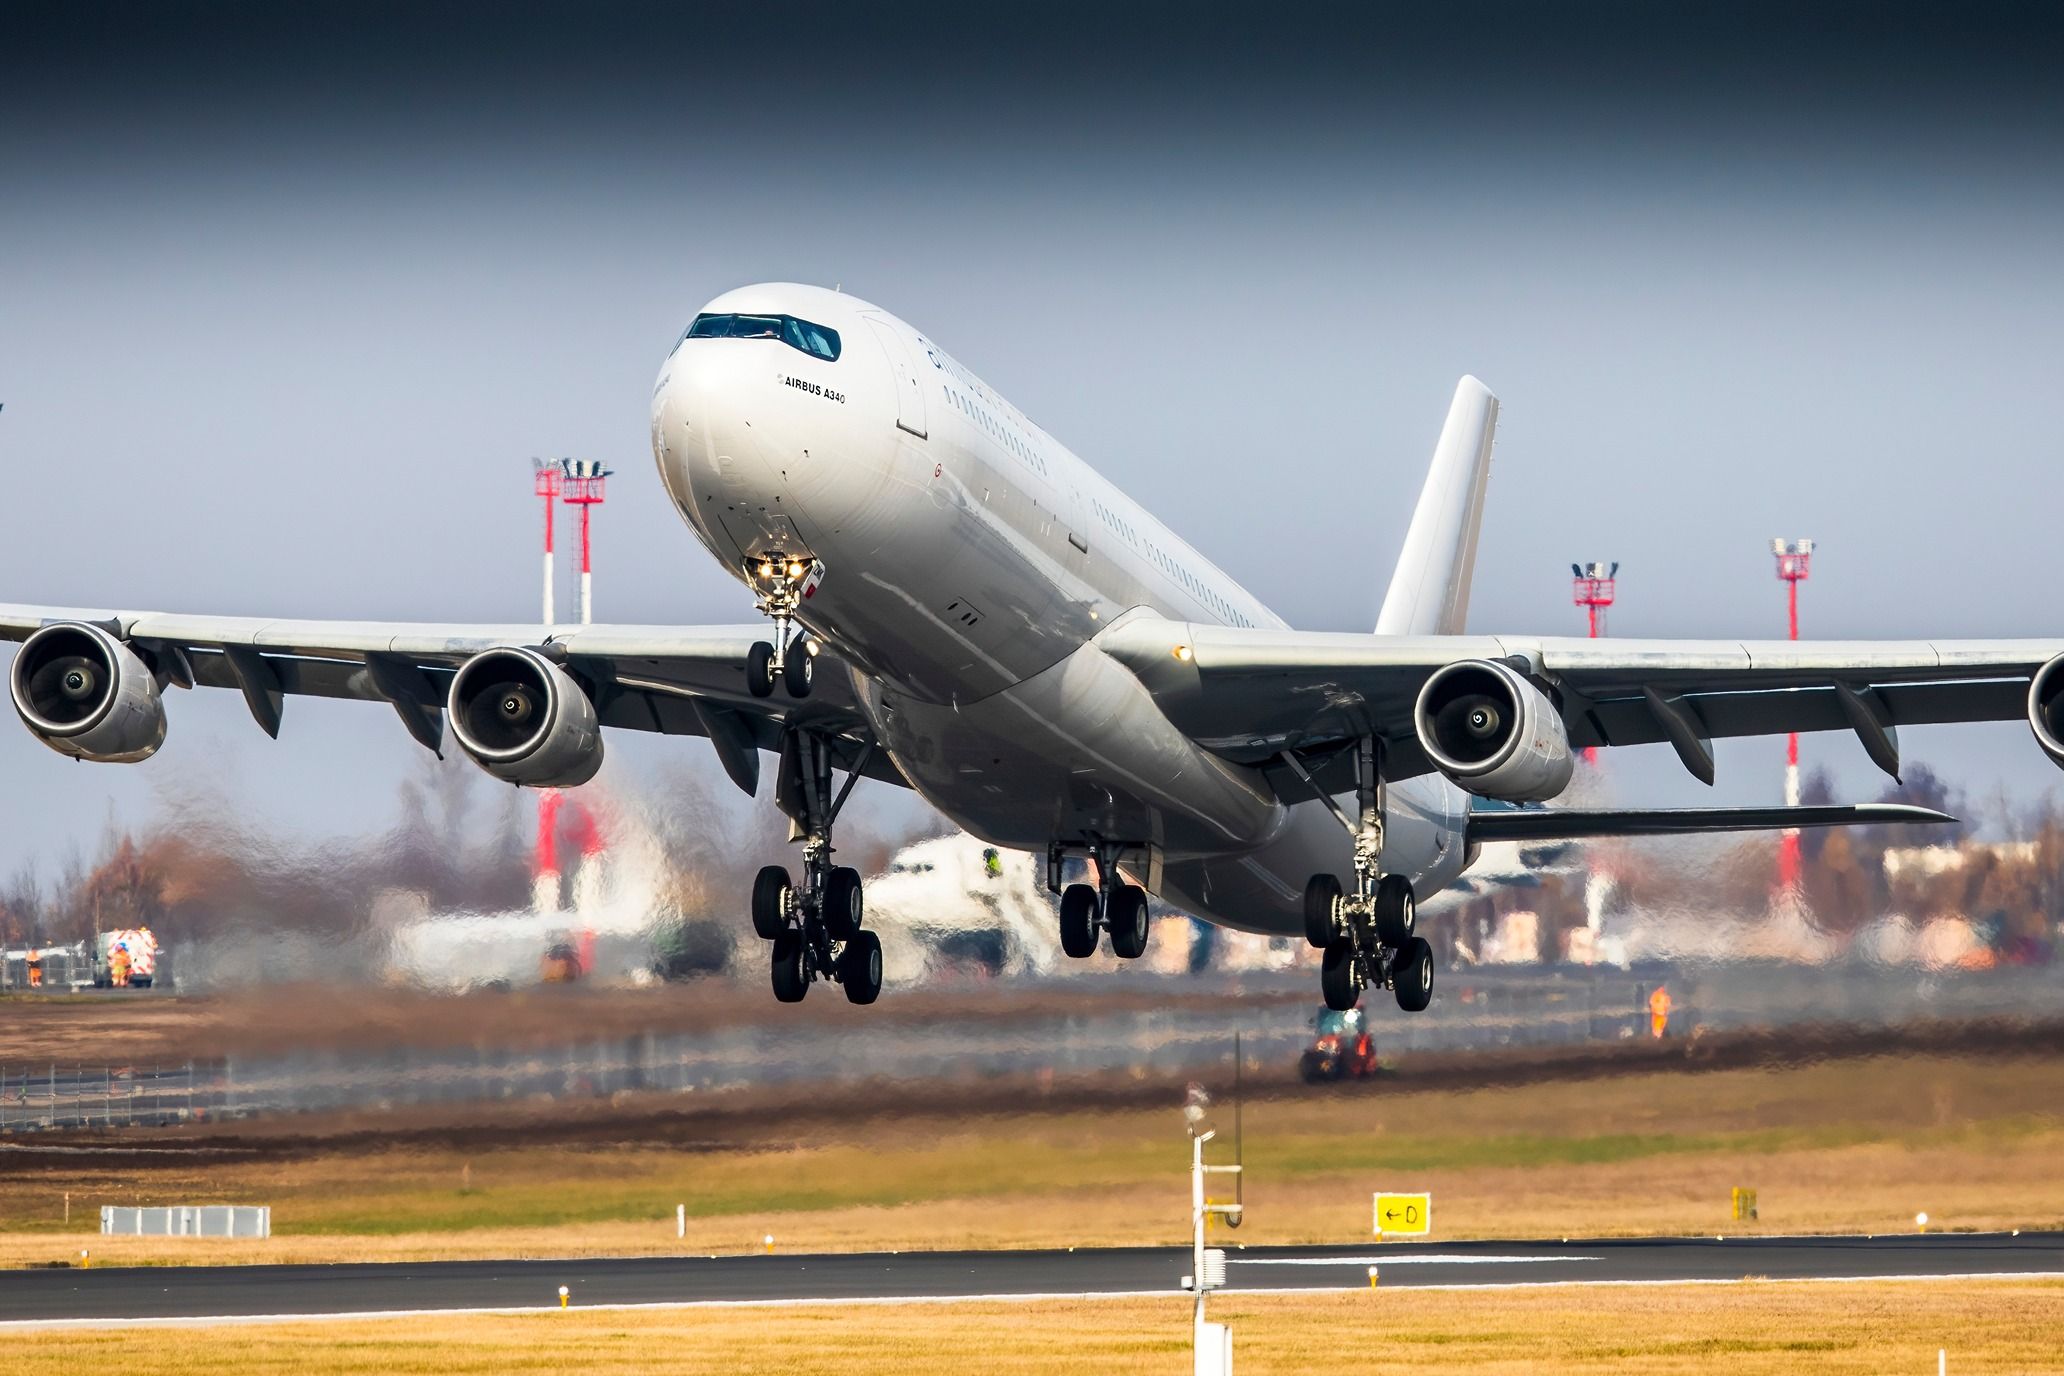 All-white Airbus A340 departing